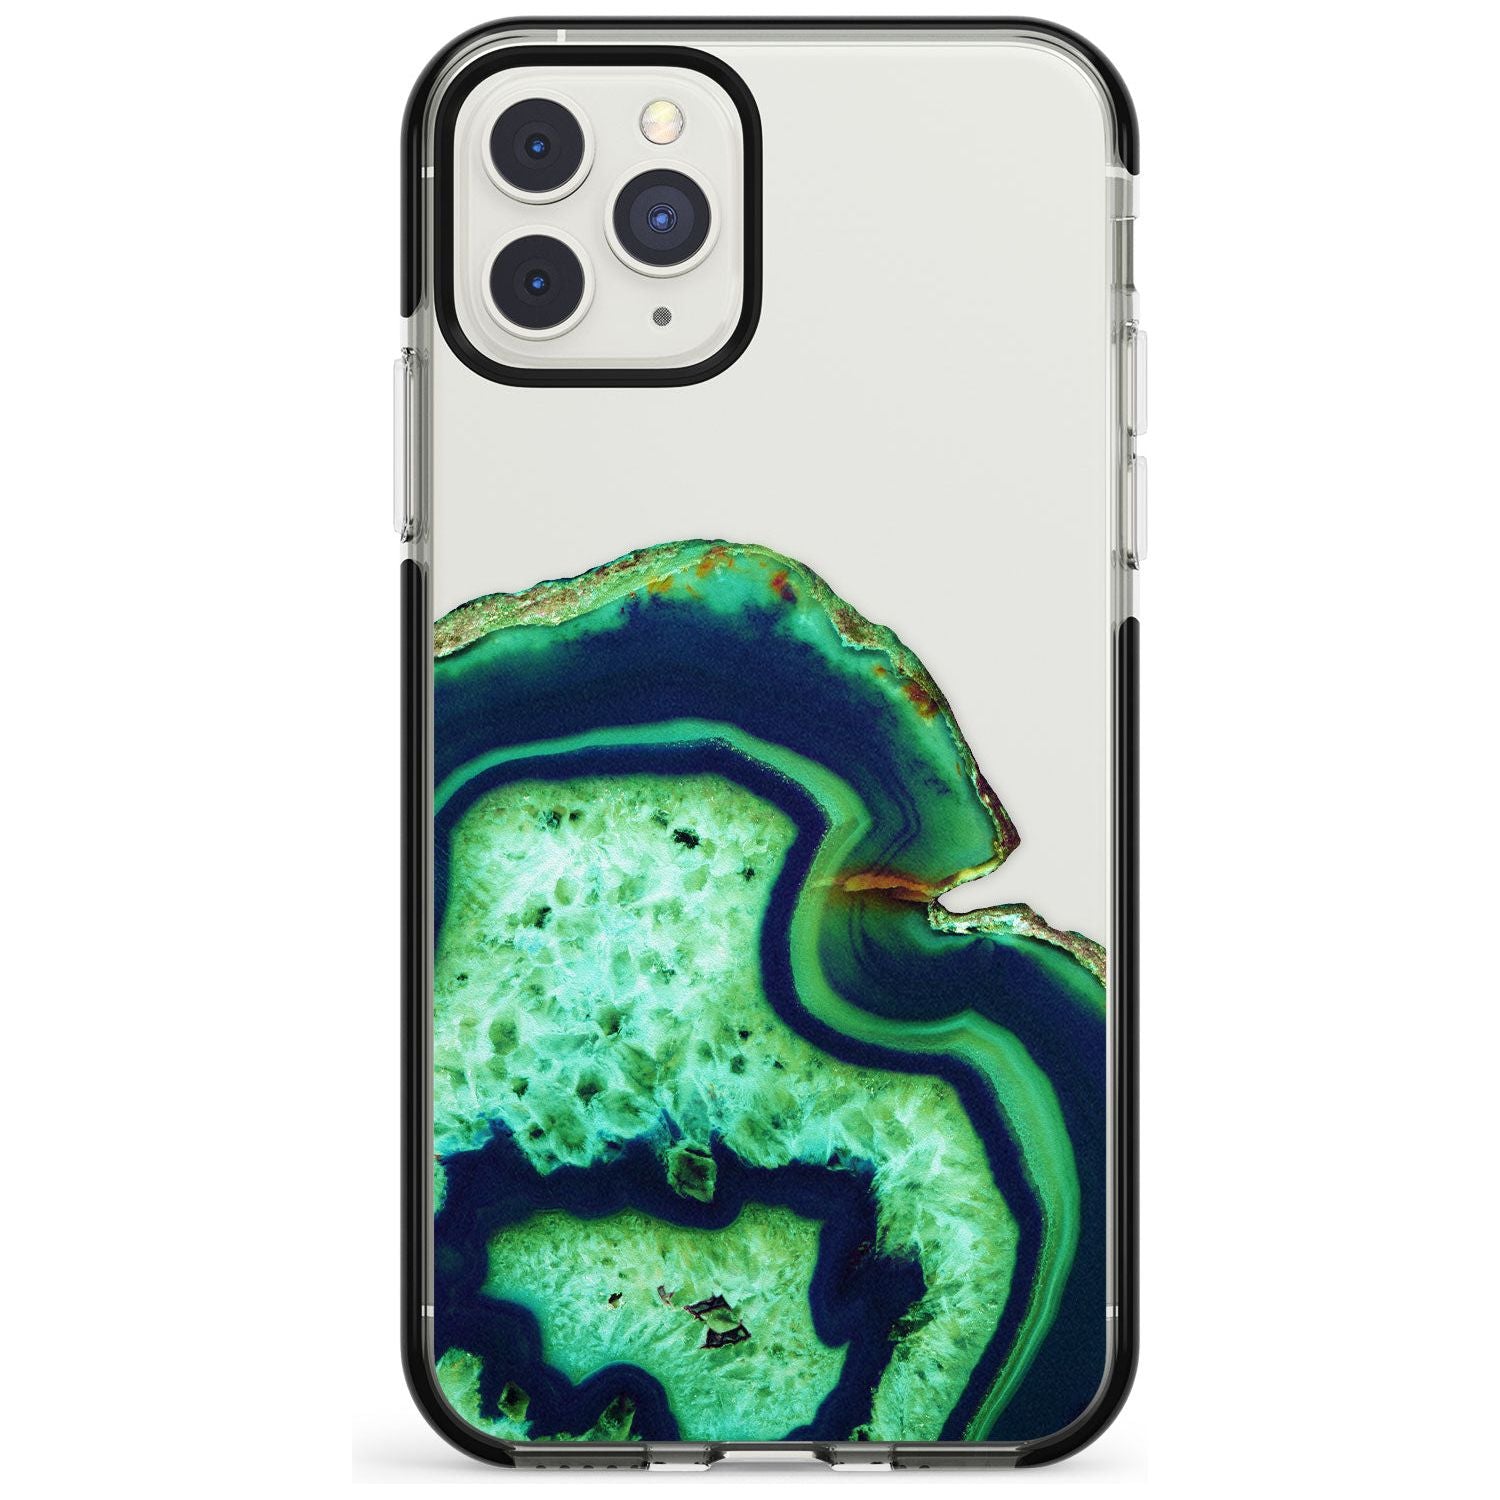 Neon Green & Blue Agate Crystal Transparent Design Black Impact Phone Case for iPhone 11 Pro Max